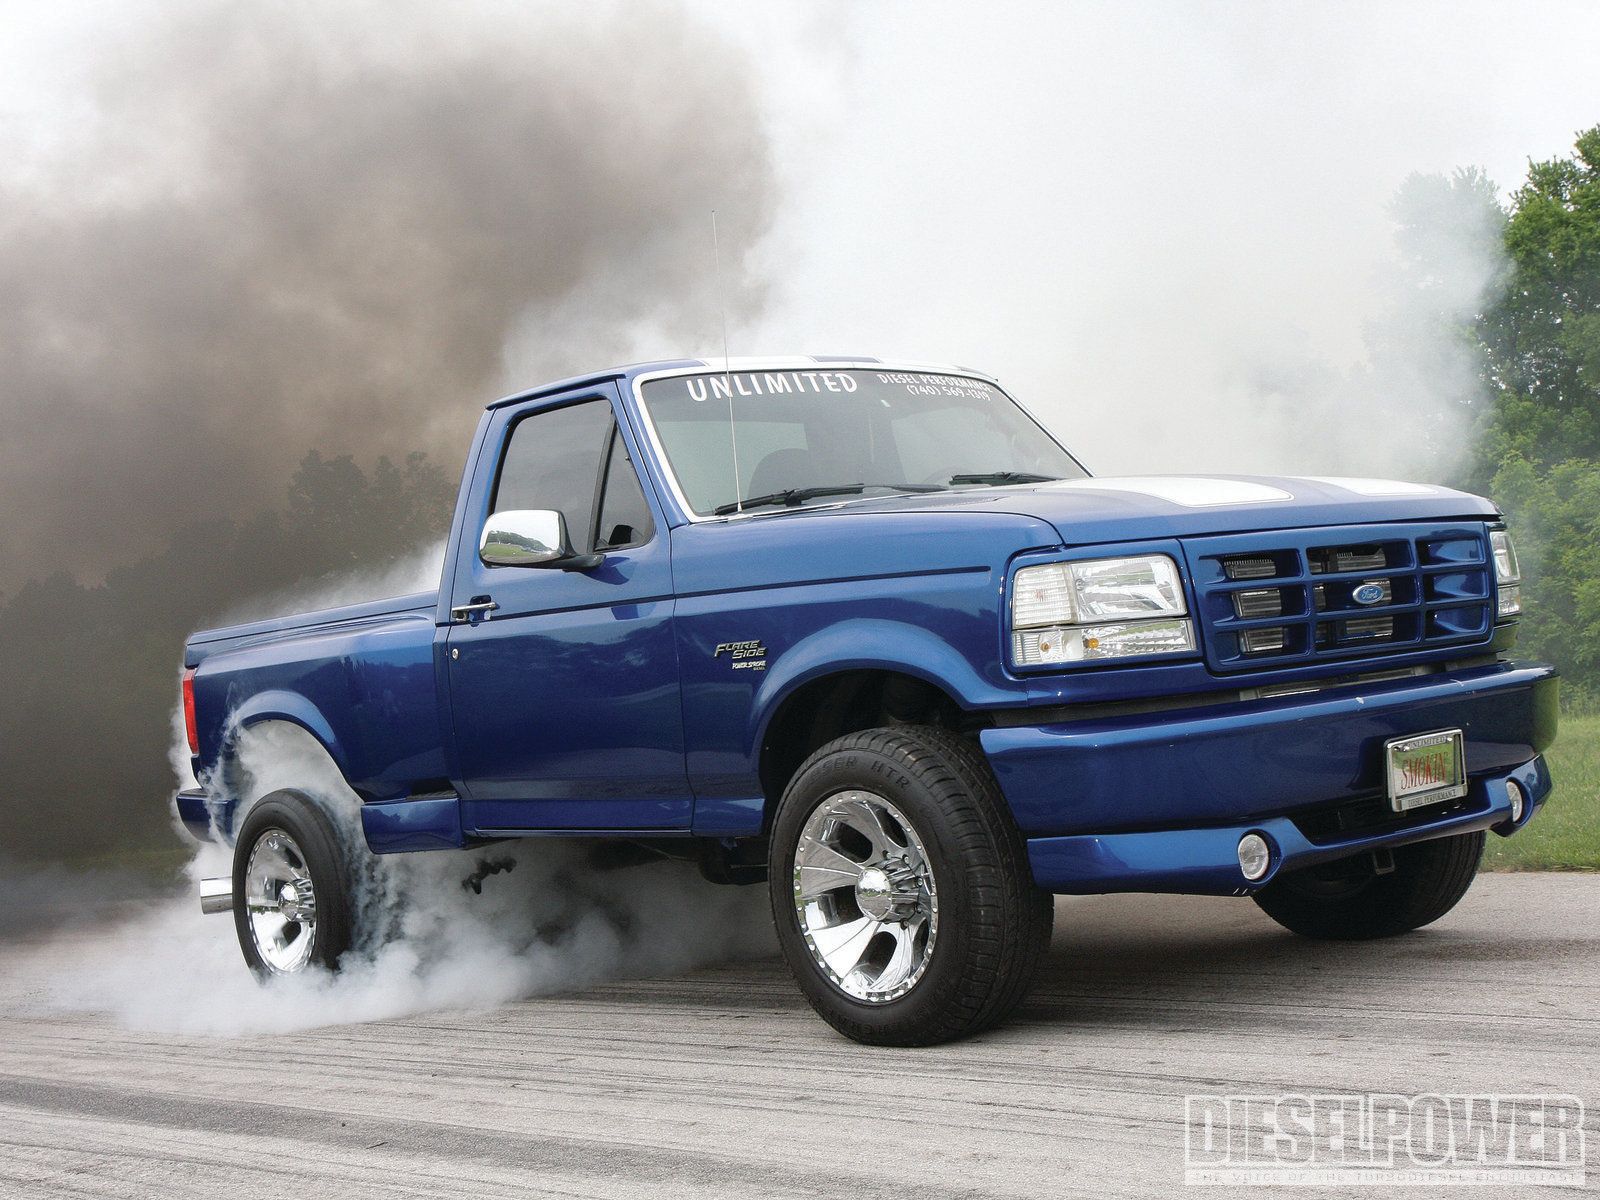 Ford Flare Side wallpaper, Vehicles, HQ Ford Flare Side pictureK Wallpaper 2019